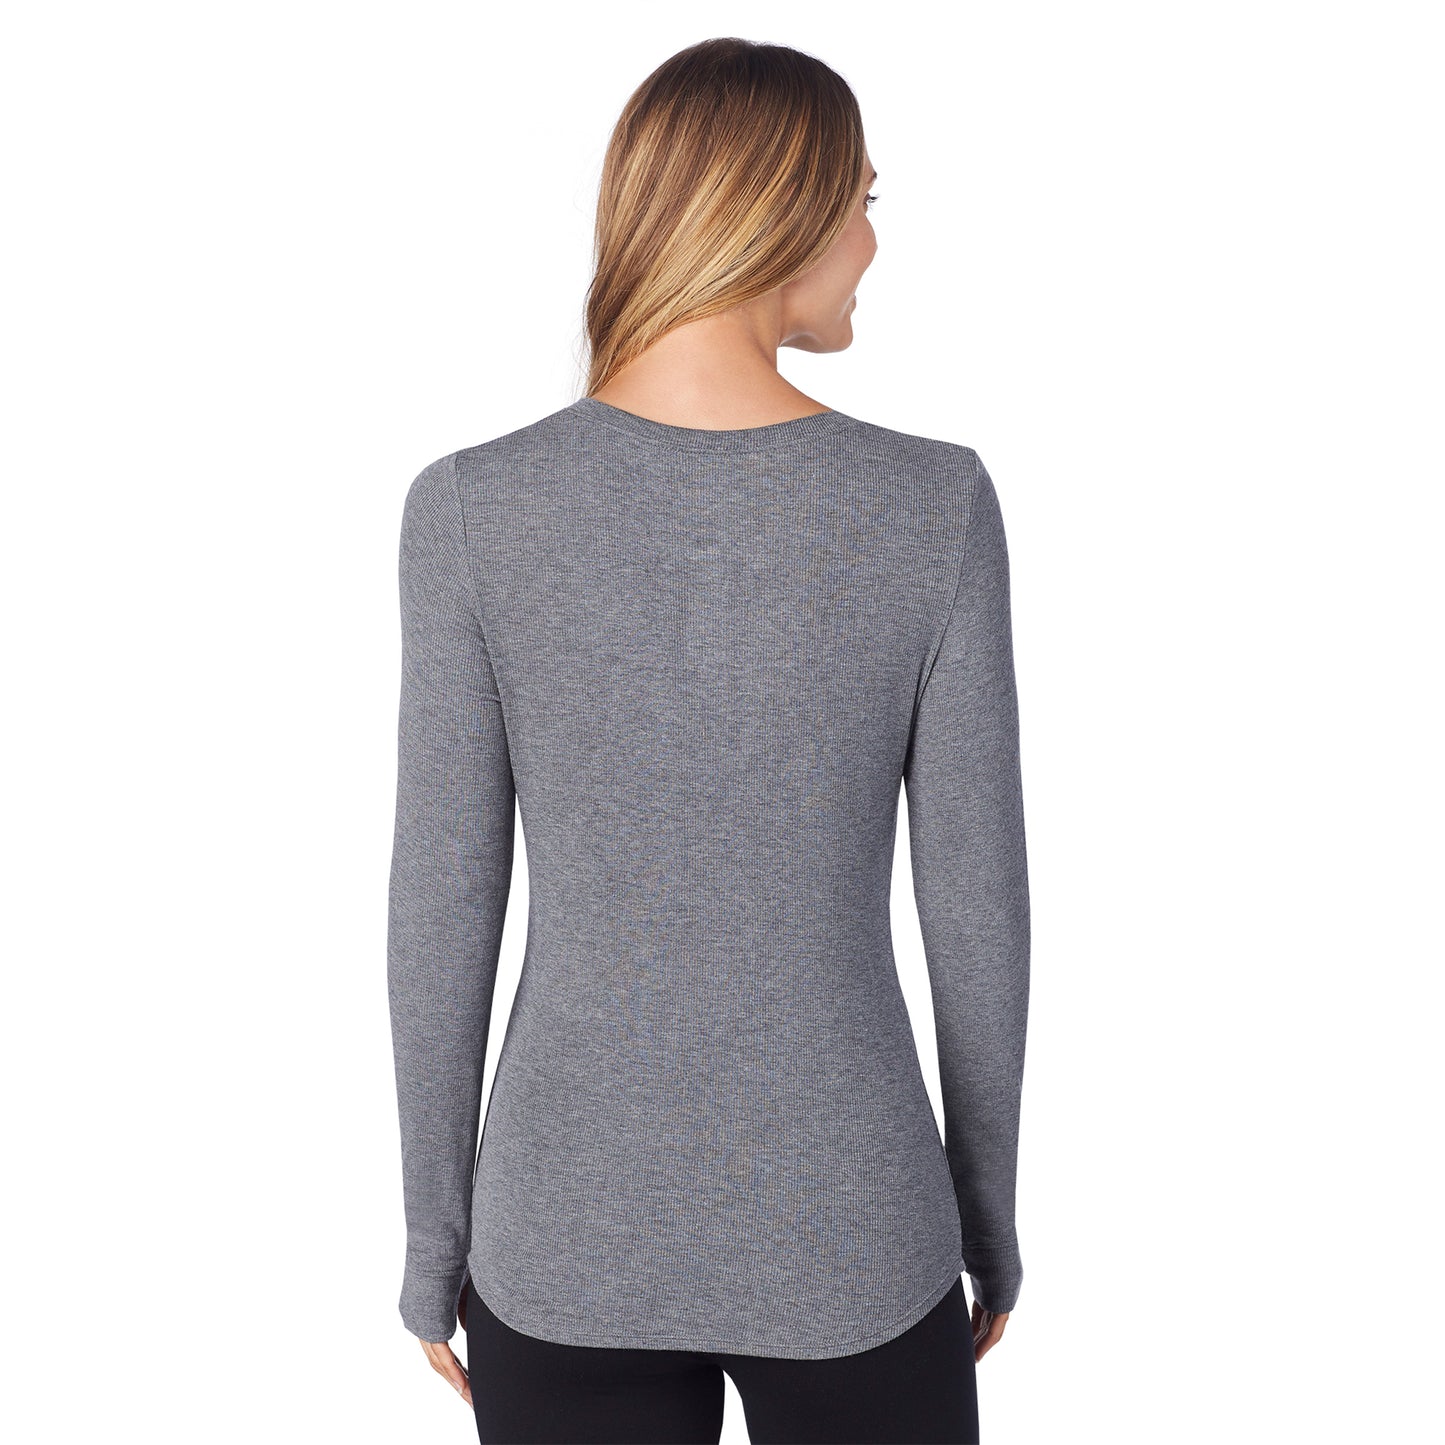 Charcoal Heather; Model is wearing size S. She is 5’9”, Bust 32”, Waist 25.5”, Hips 36”. @A lady wearing a charcoal heather ribbed long sleeve henley.